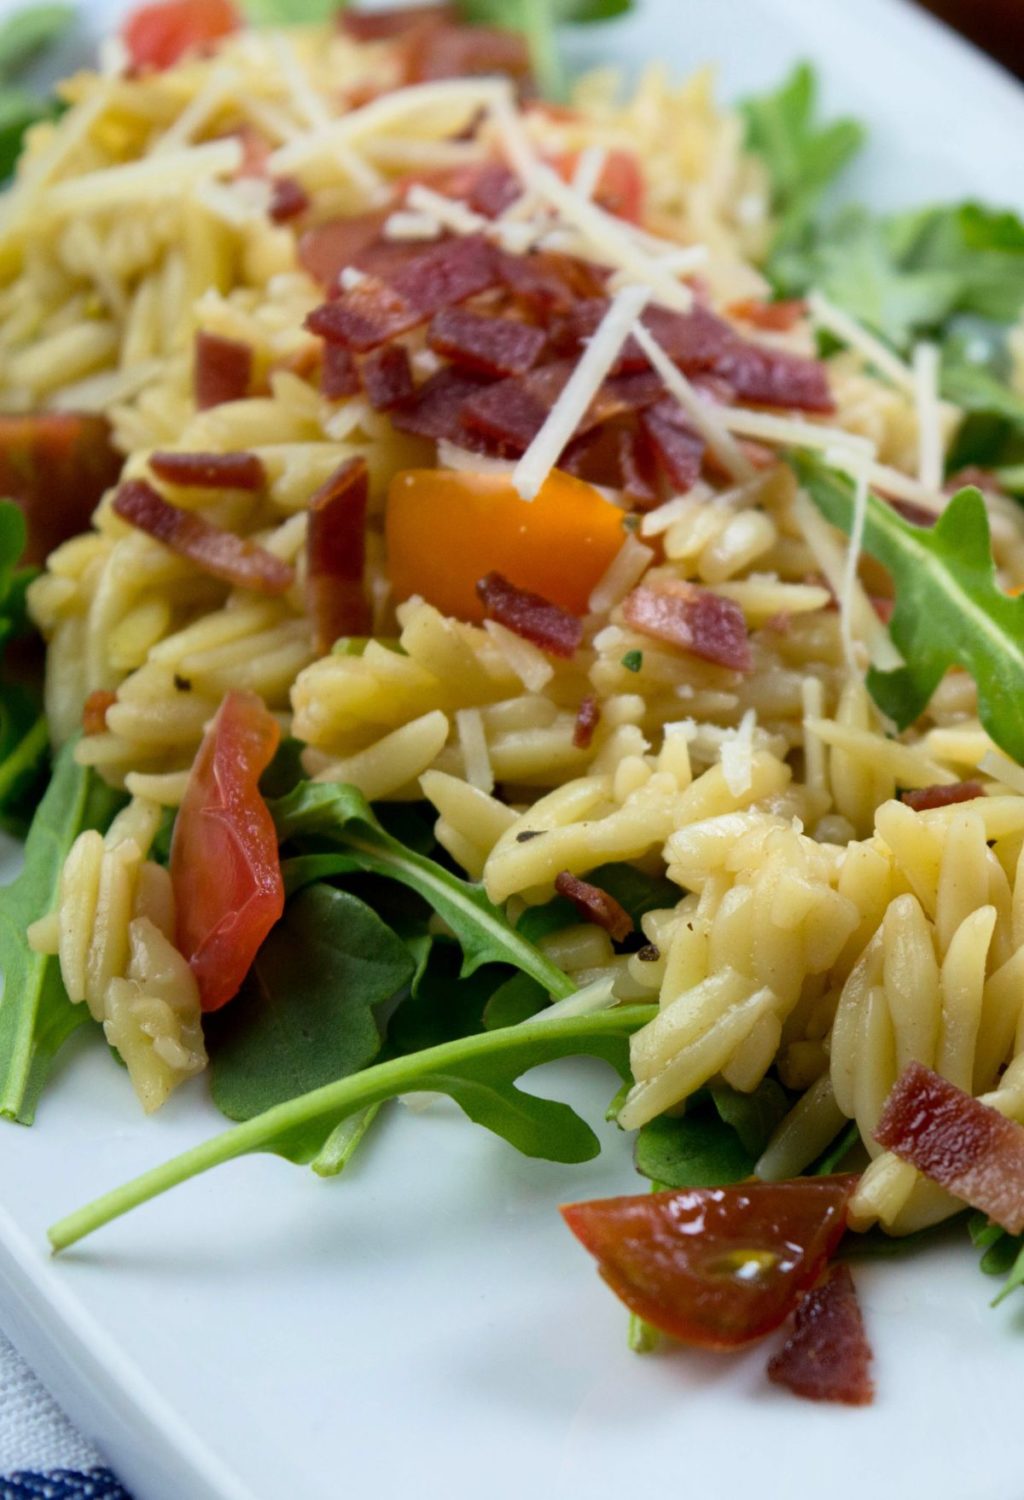 A plate with arugula, tomatoes, bacon and orzo.